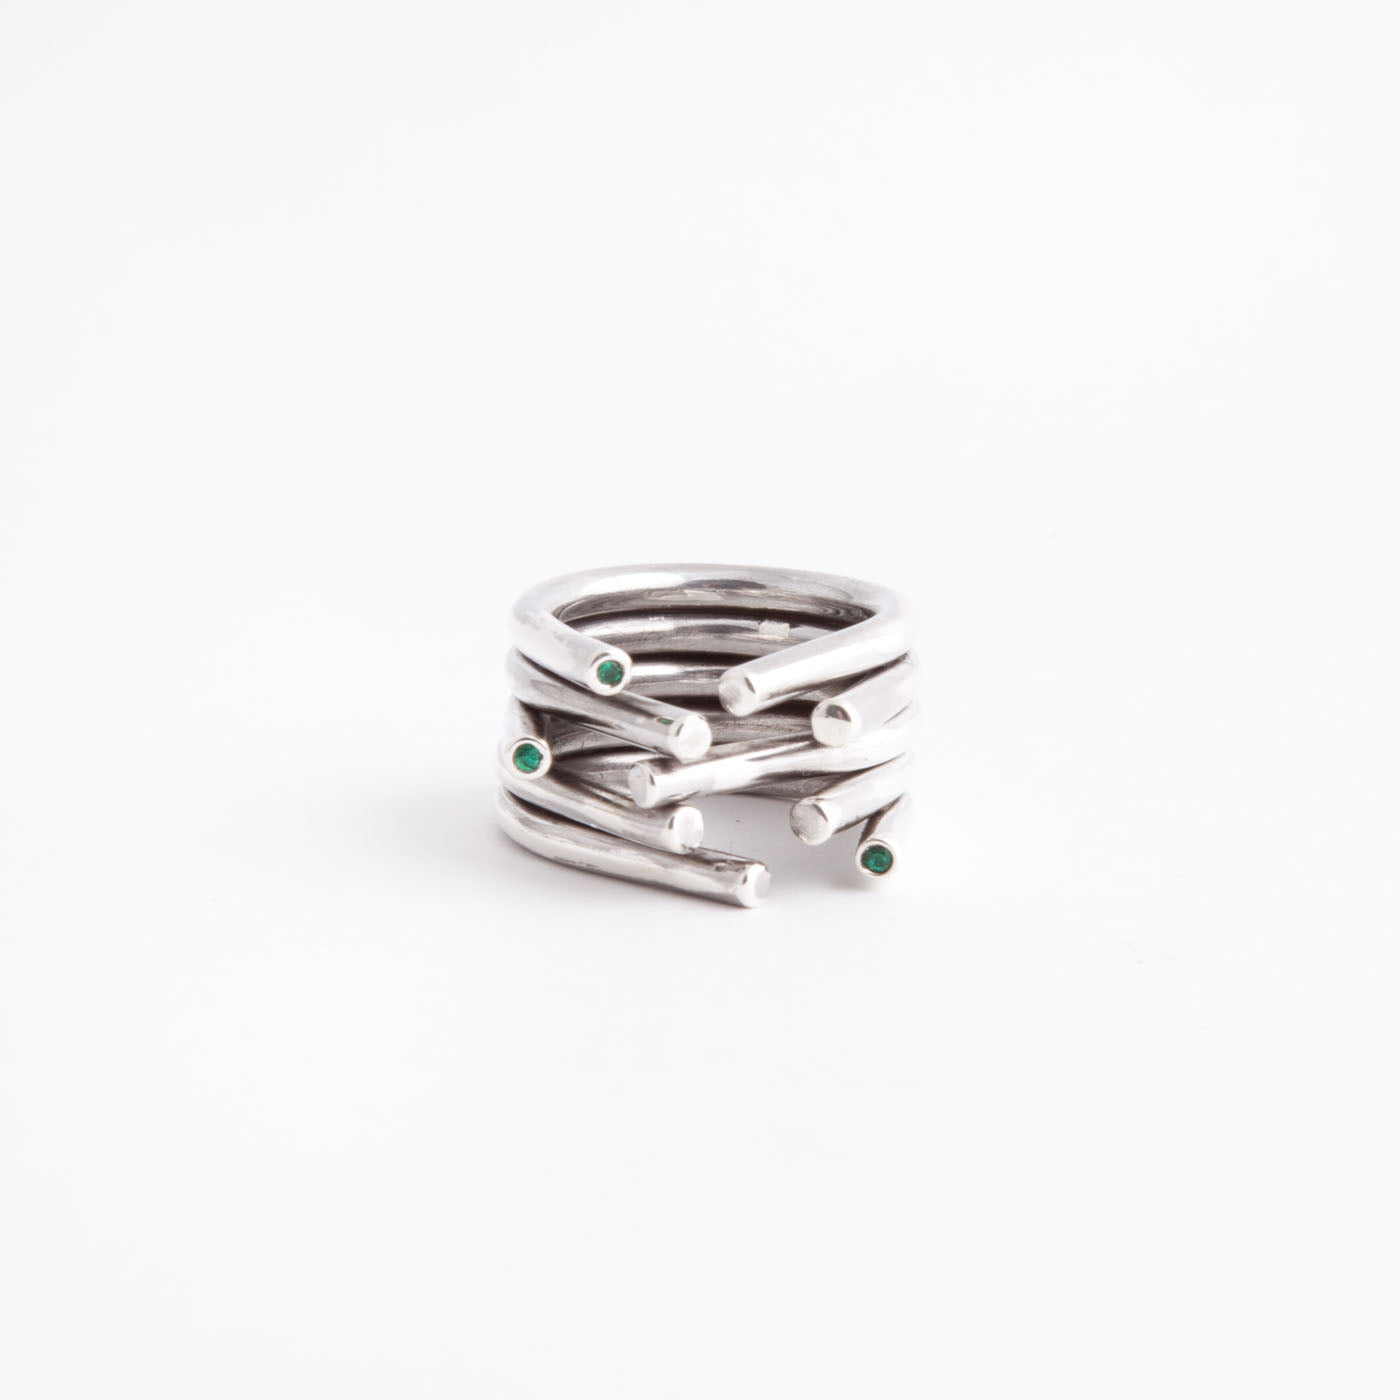 Ring Chaotic silver with green emeralds standing product view innan jewellery independent atelier berlin